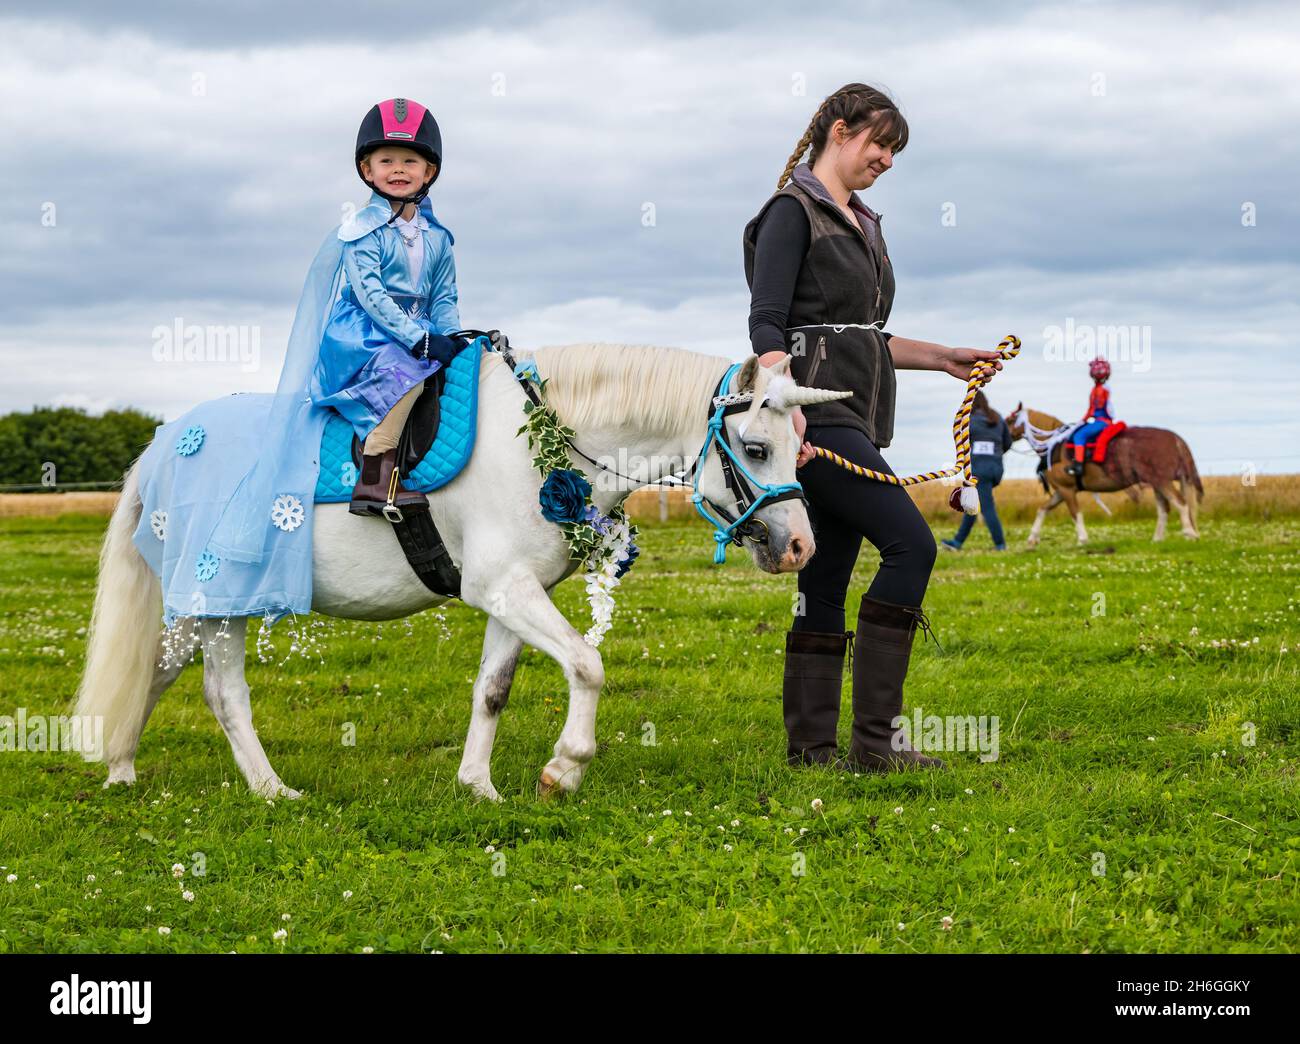 Summer horse show: a child on a pony dressed as a unicorn in a fancy dress competition, East Lothian, Scotland, UK Stock Photo